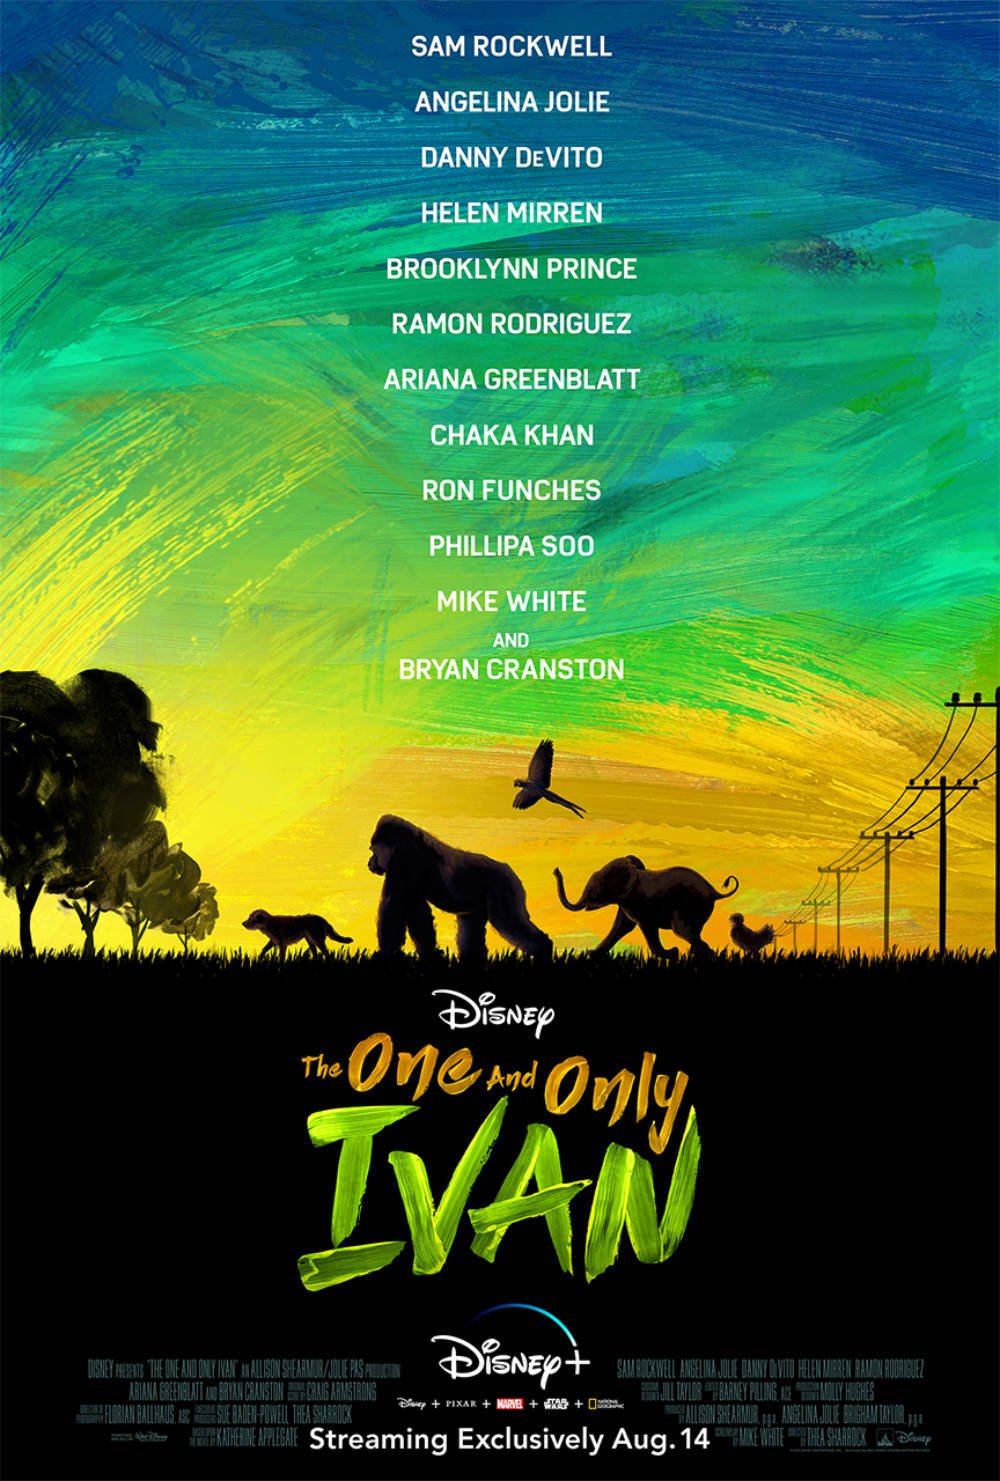 Gli animali di The one and only Ivan